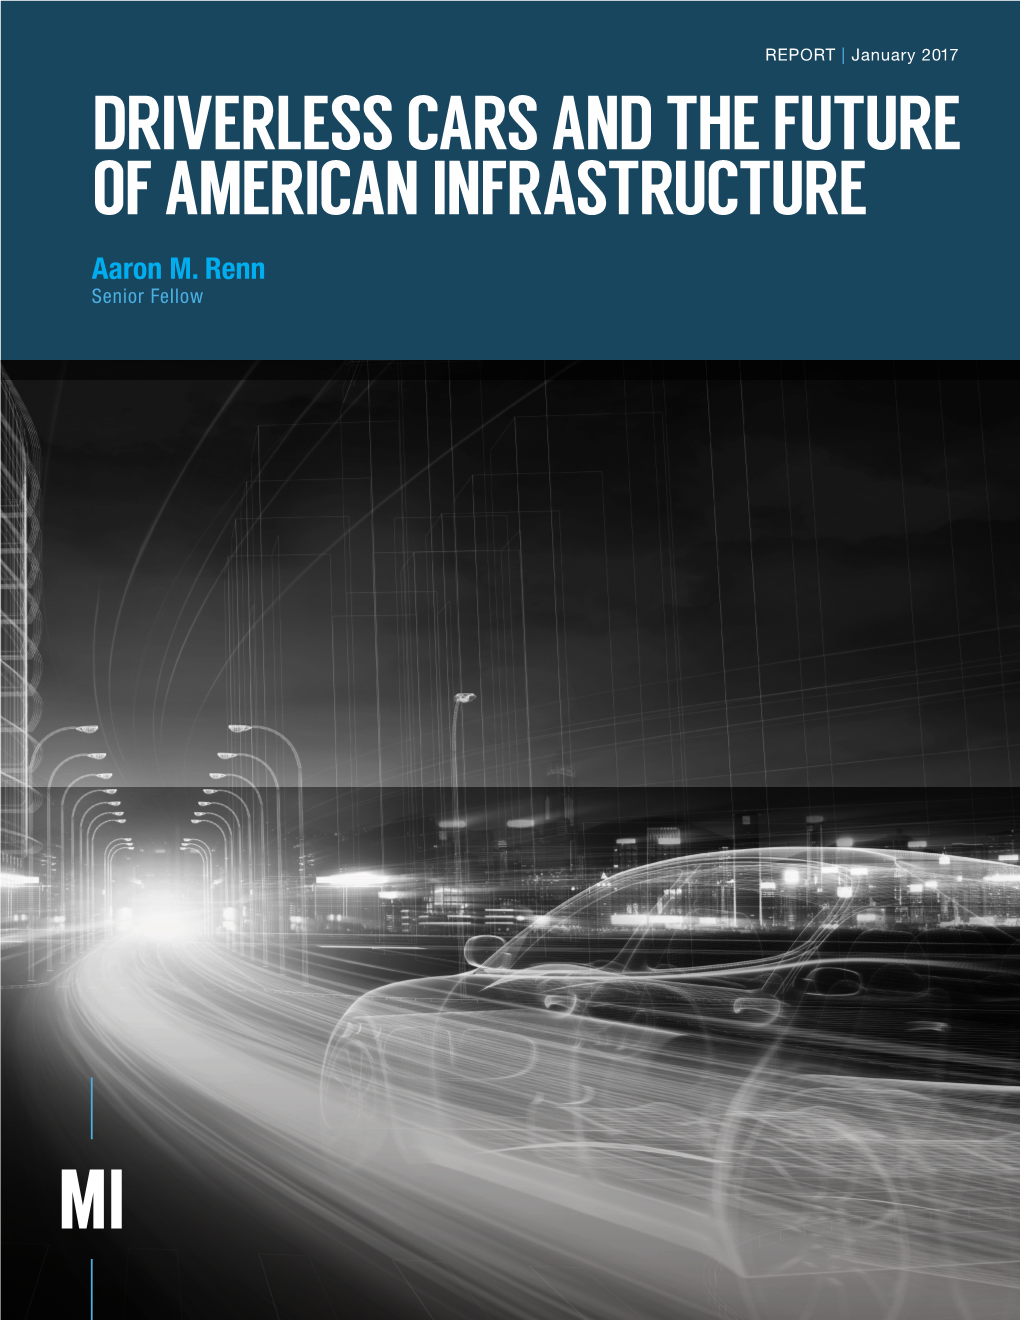 Driverless Cars and the Future of American Infrastructure